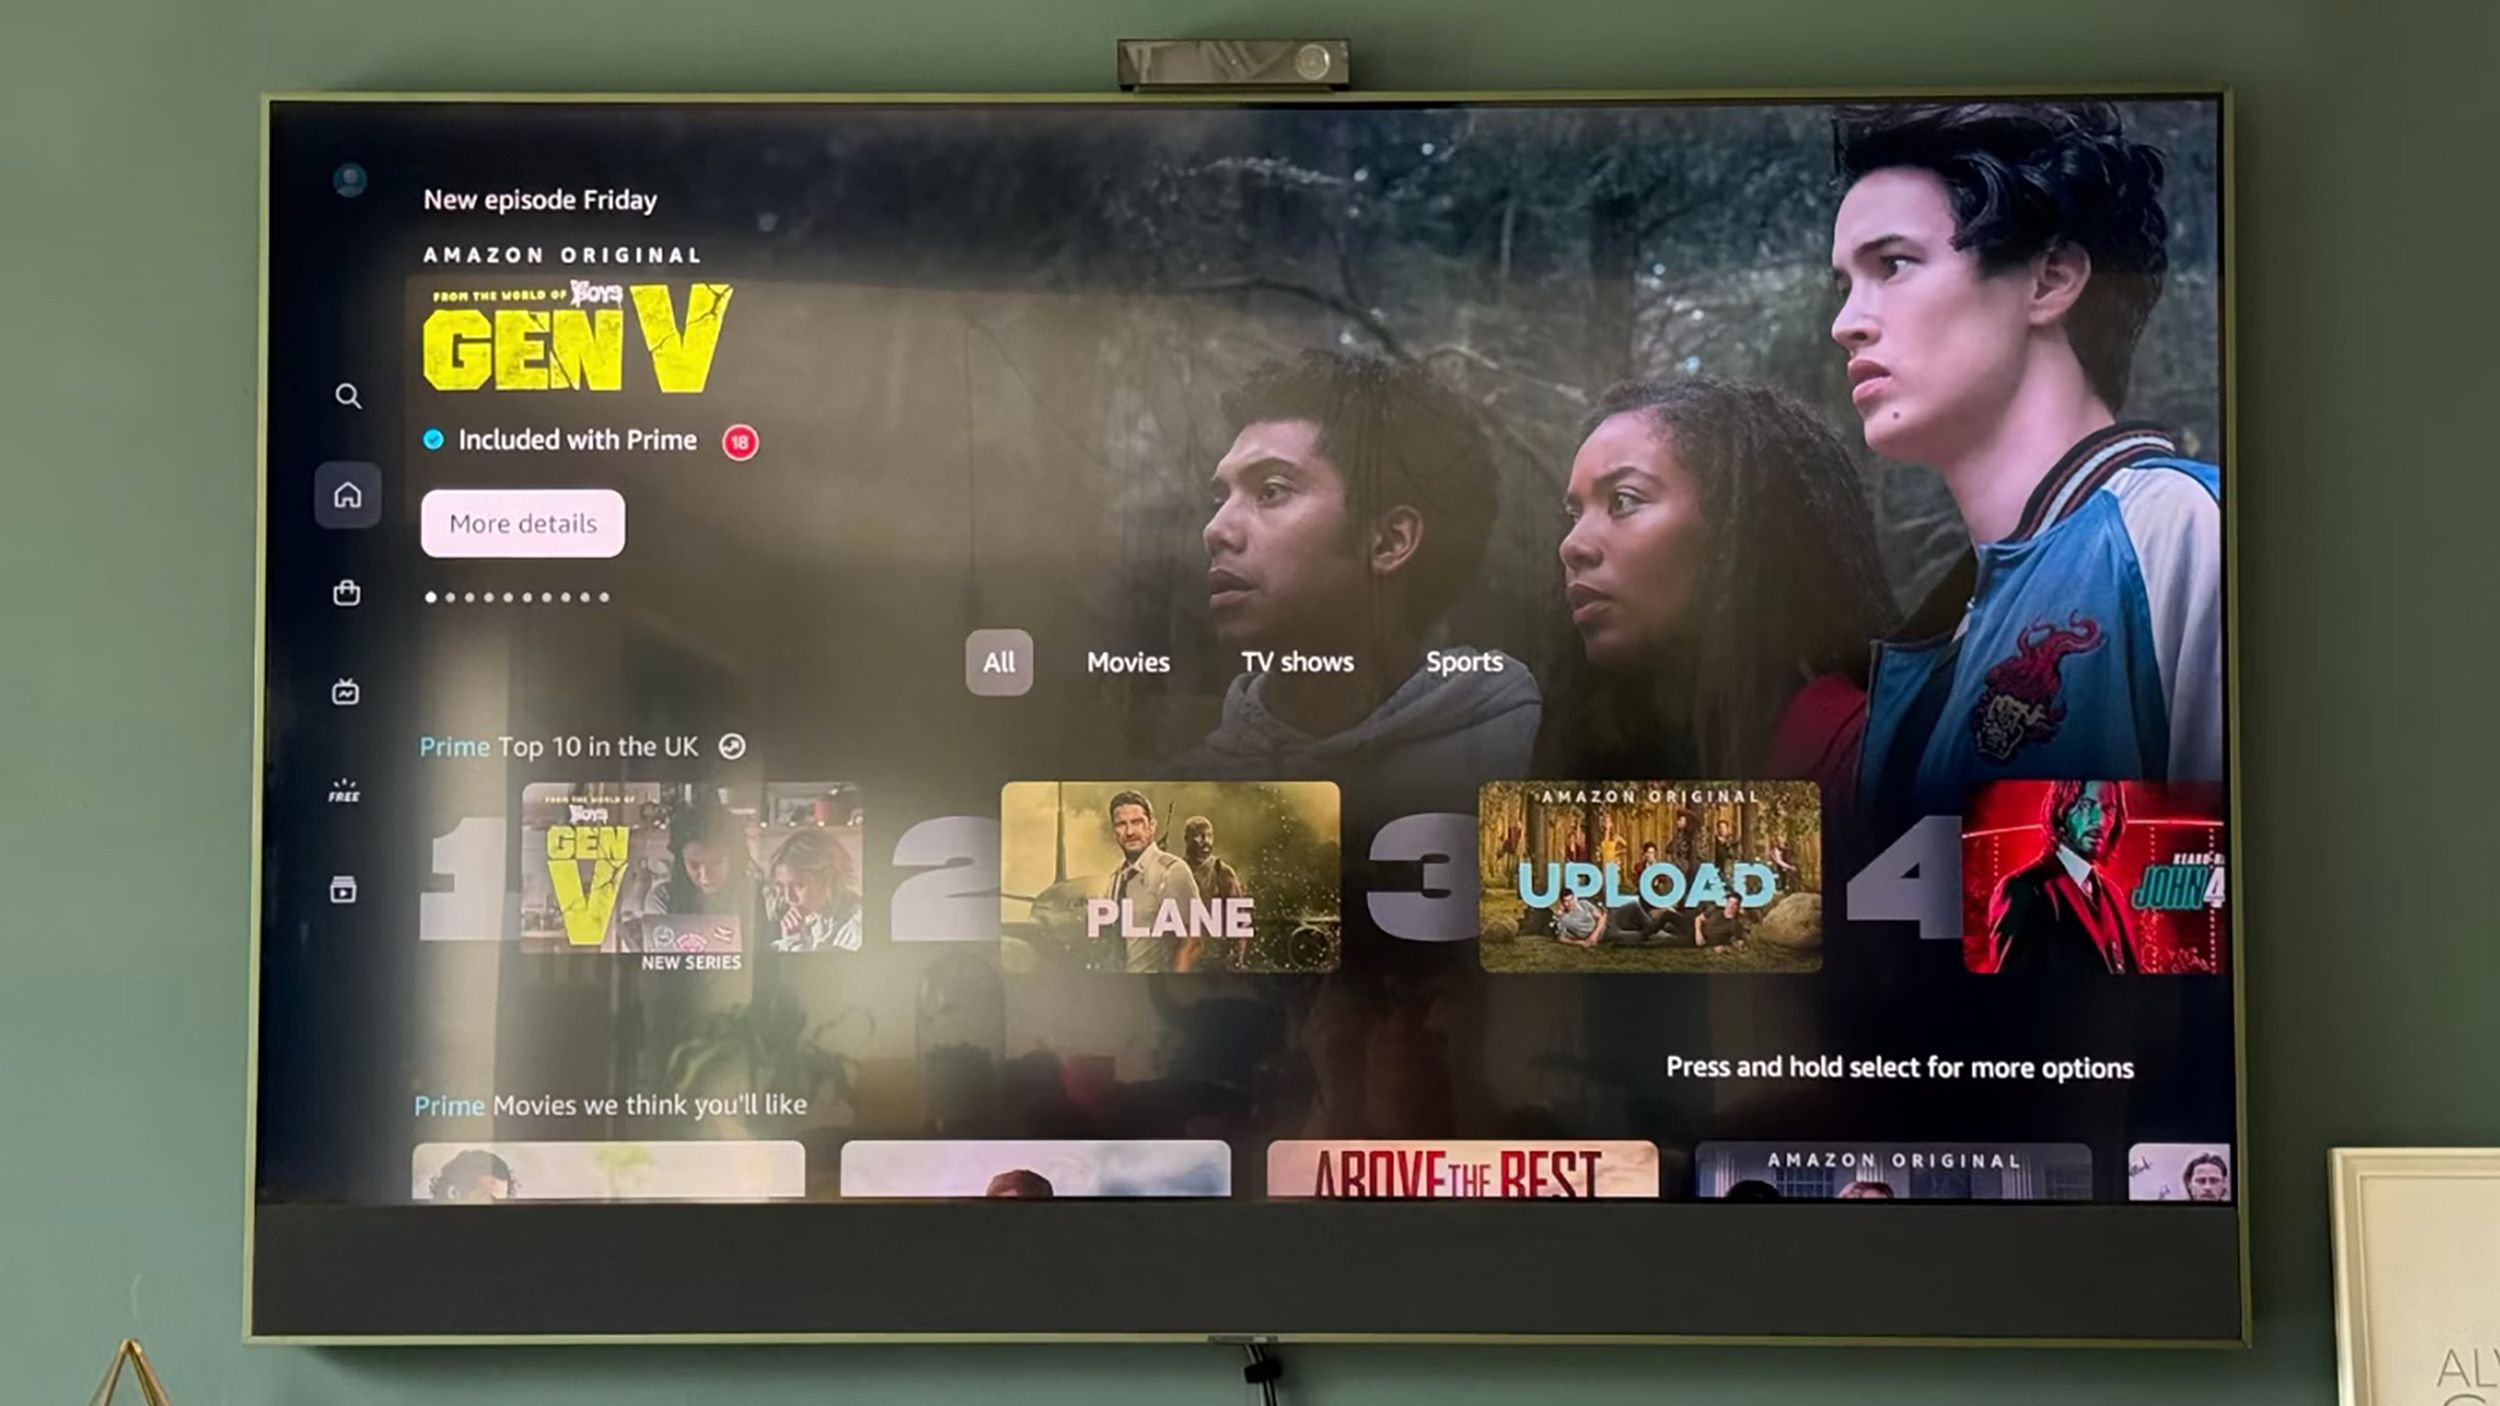 starts offering Prime Video as a $8.99 monthly subscription